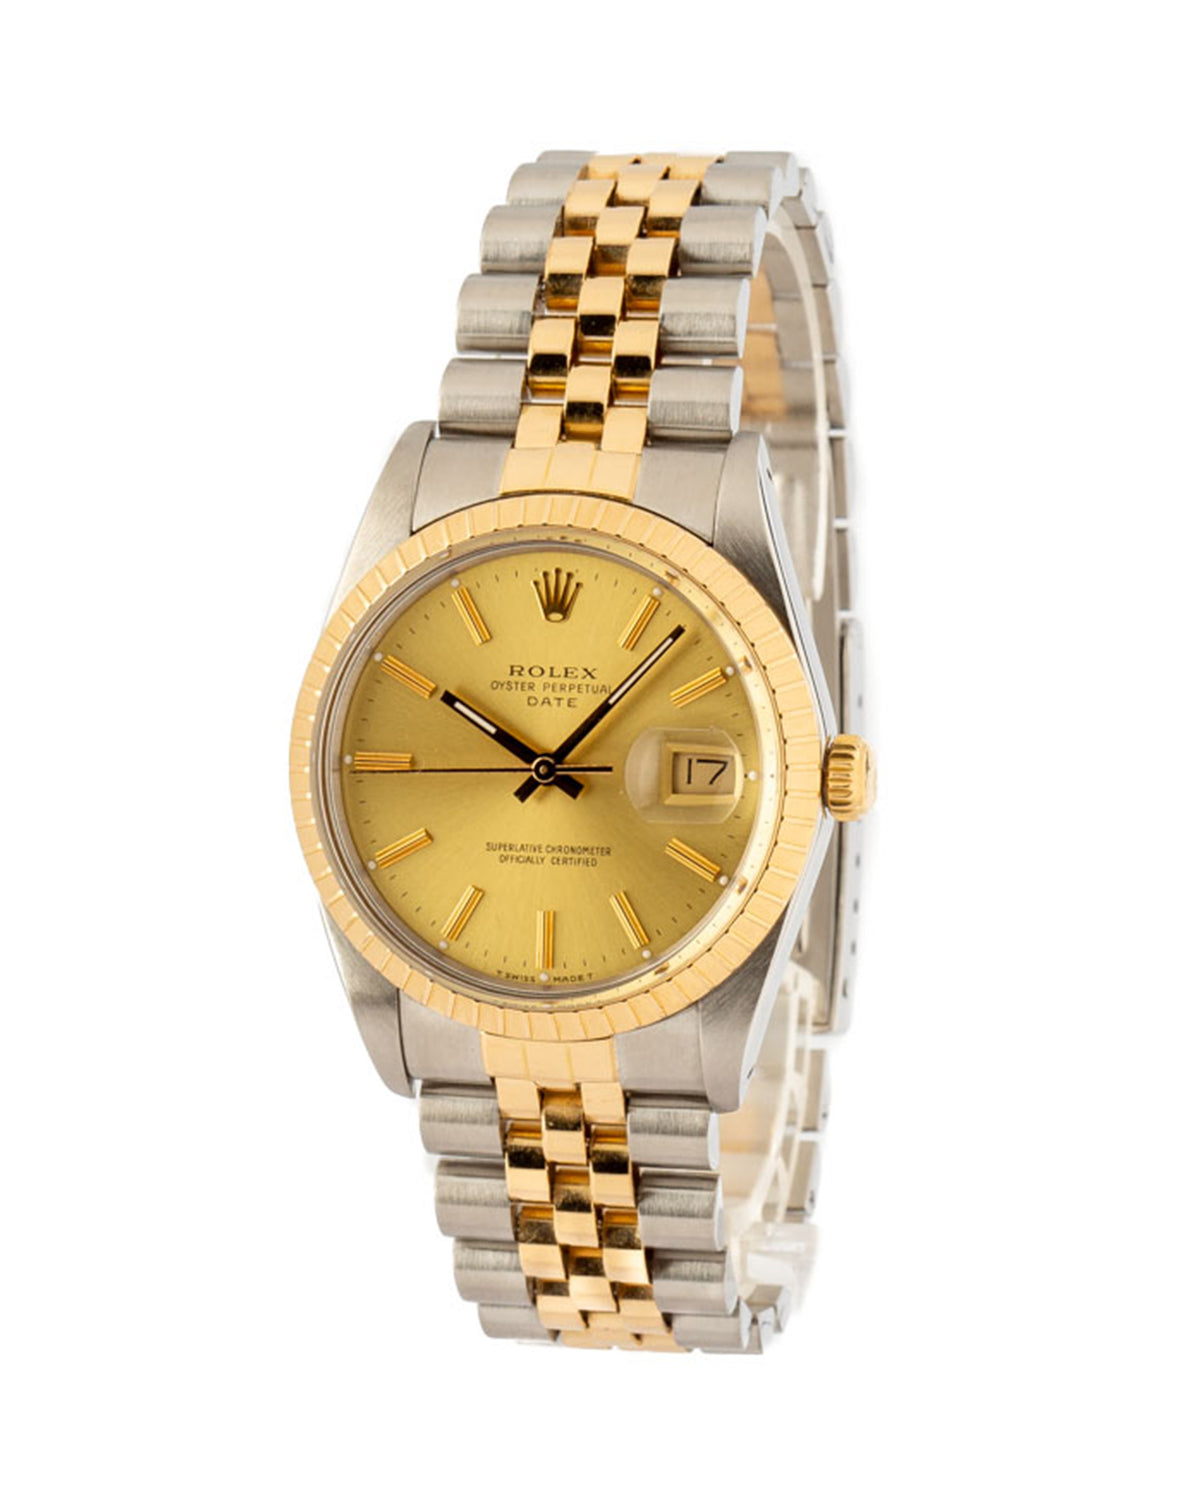 Rolex Datejust Yellow Gold/Stainless Steel 1987-1988